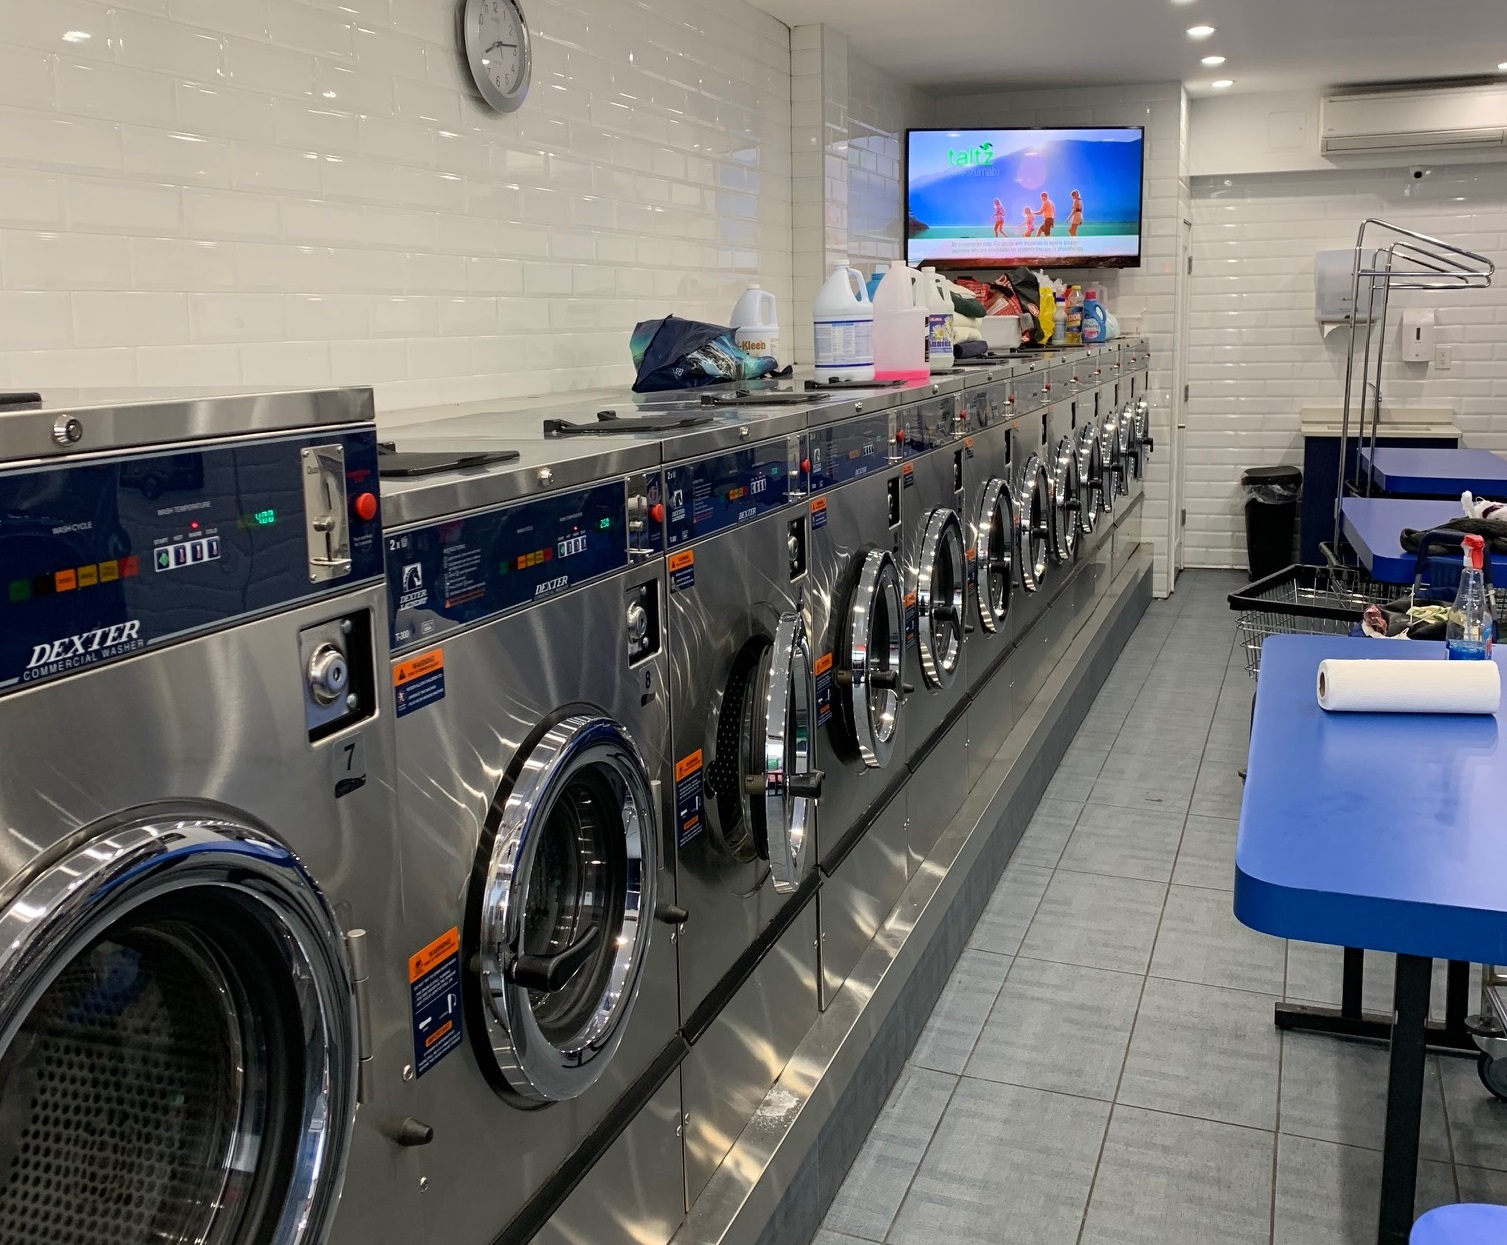 Full Service Laundromat For Sale in NY